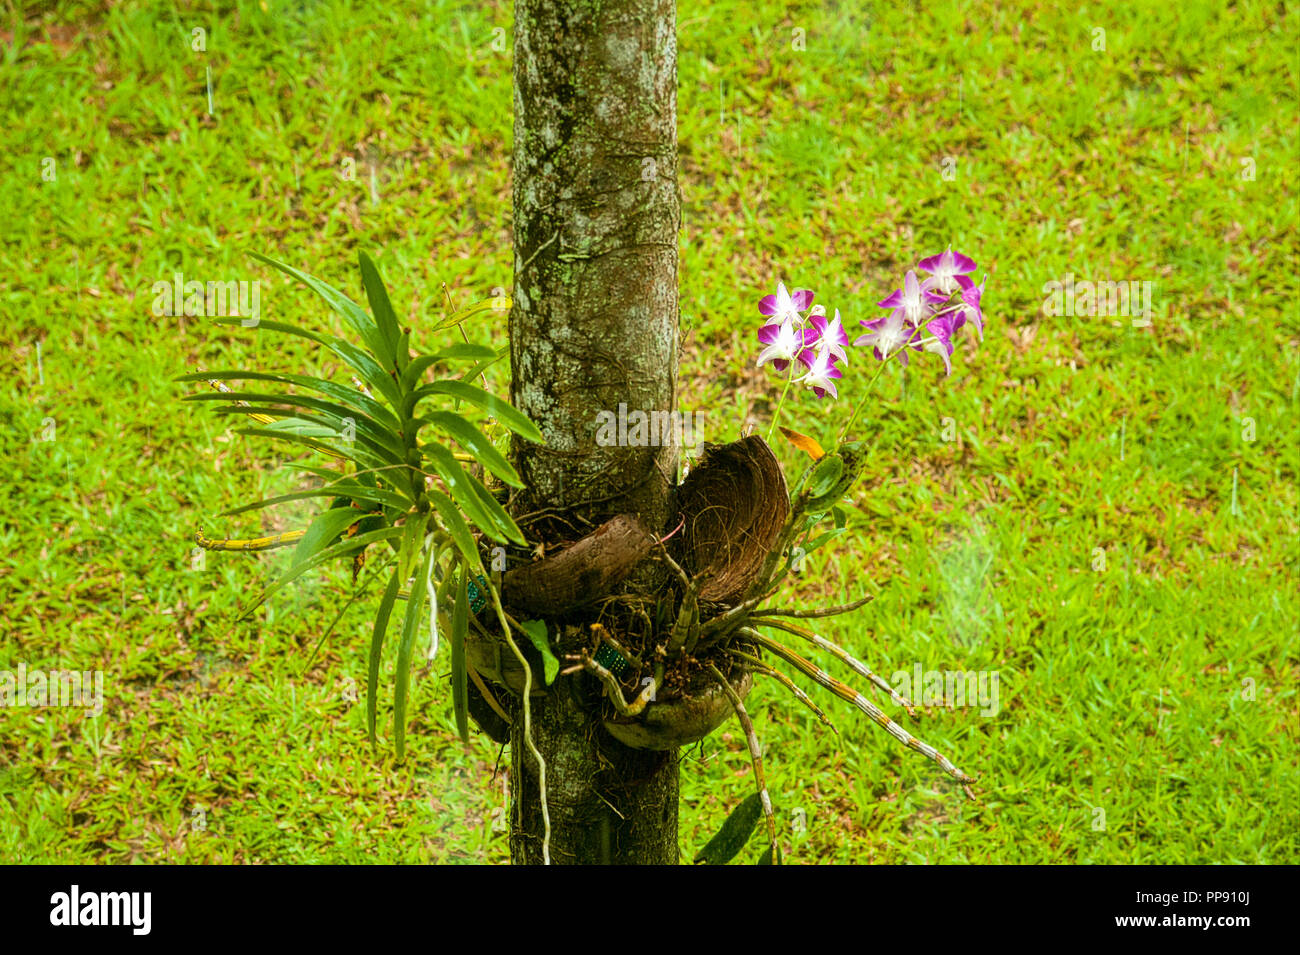 Thailand, Koh Lanta island, orchids hanging on a tree in a coconut Stock Photo